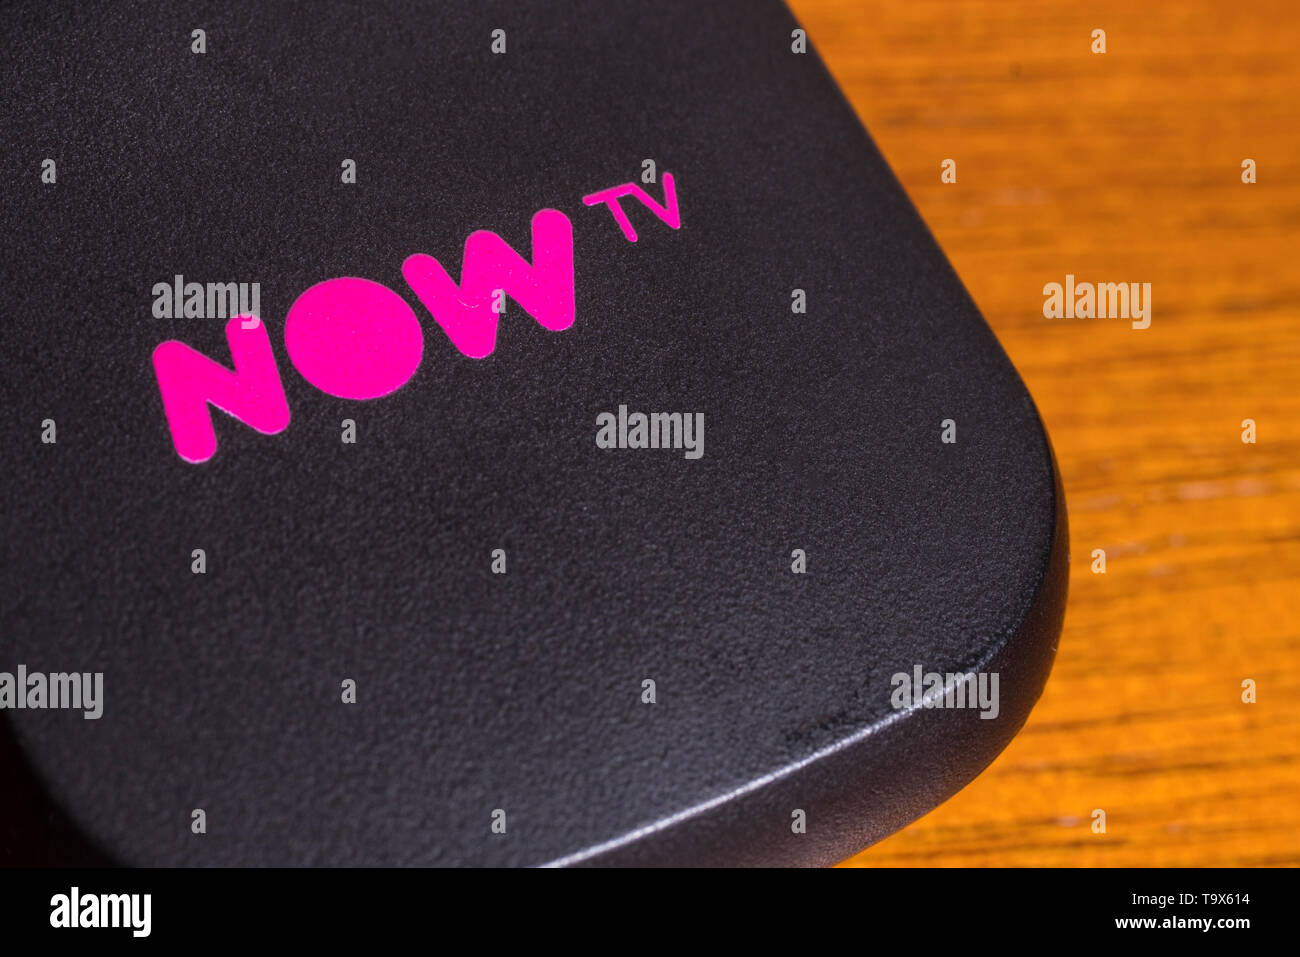 London, UK - May 14th 2019: A close-up of the NOW TV logo pictured on a remote control. Stock Photo